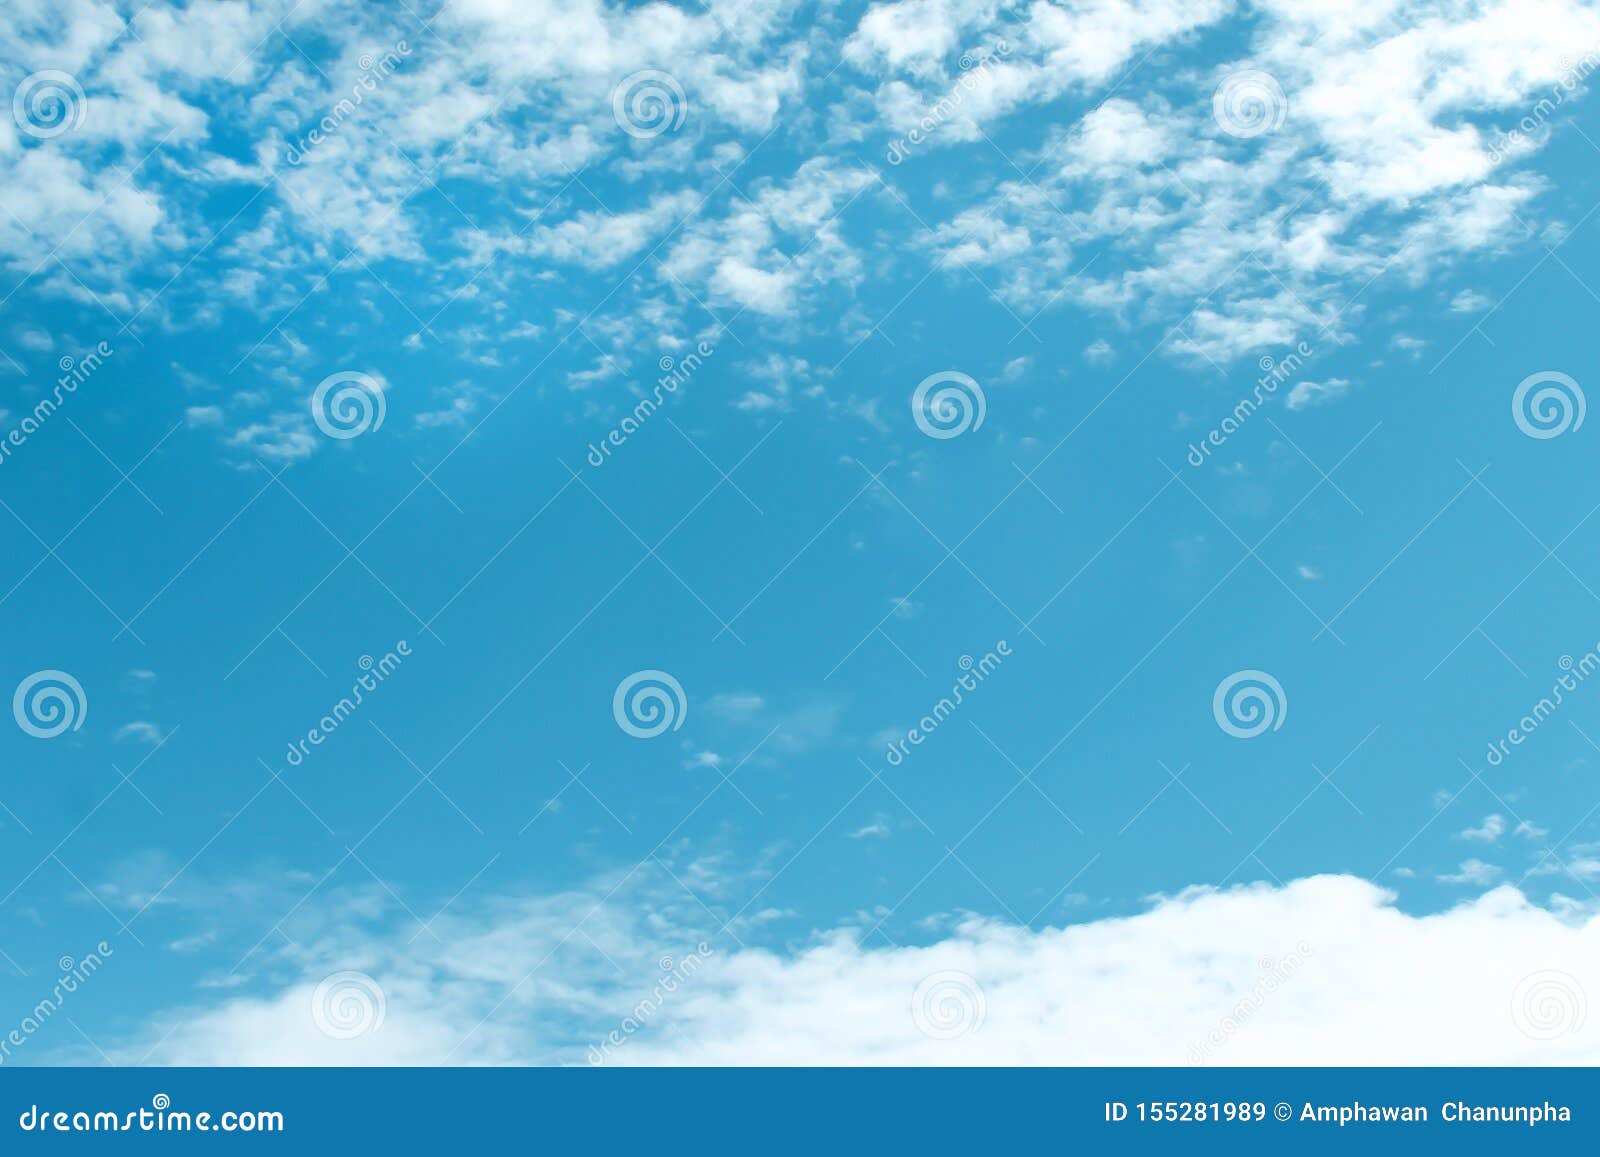 White Clouds Border Pattern and Copy Space on Blue Sky Background Stock ...